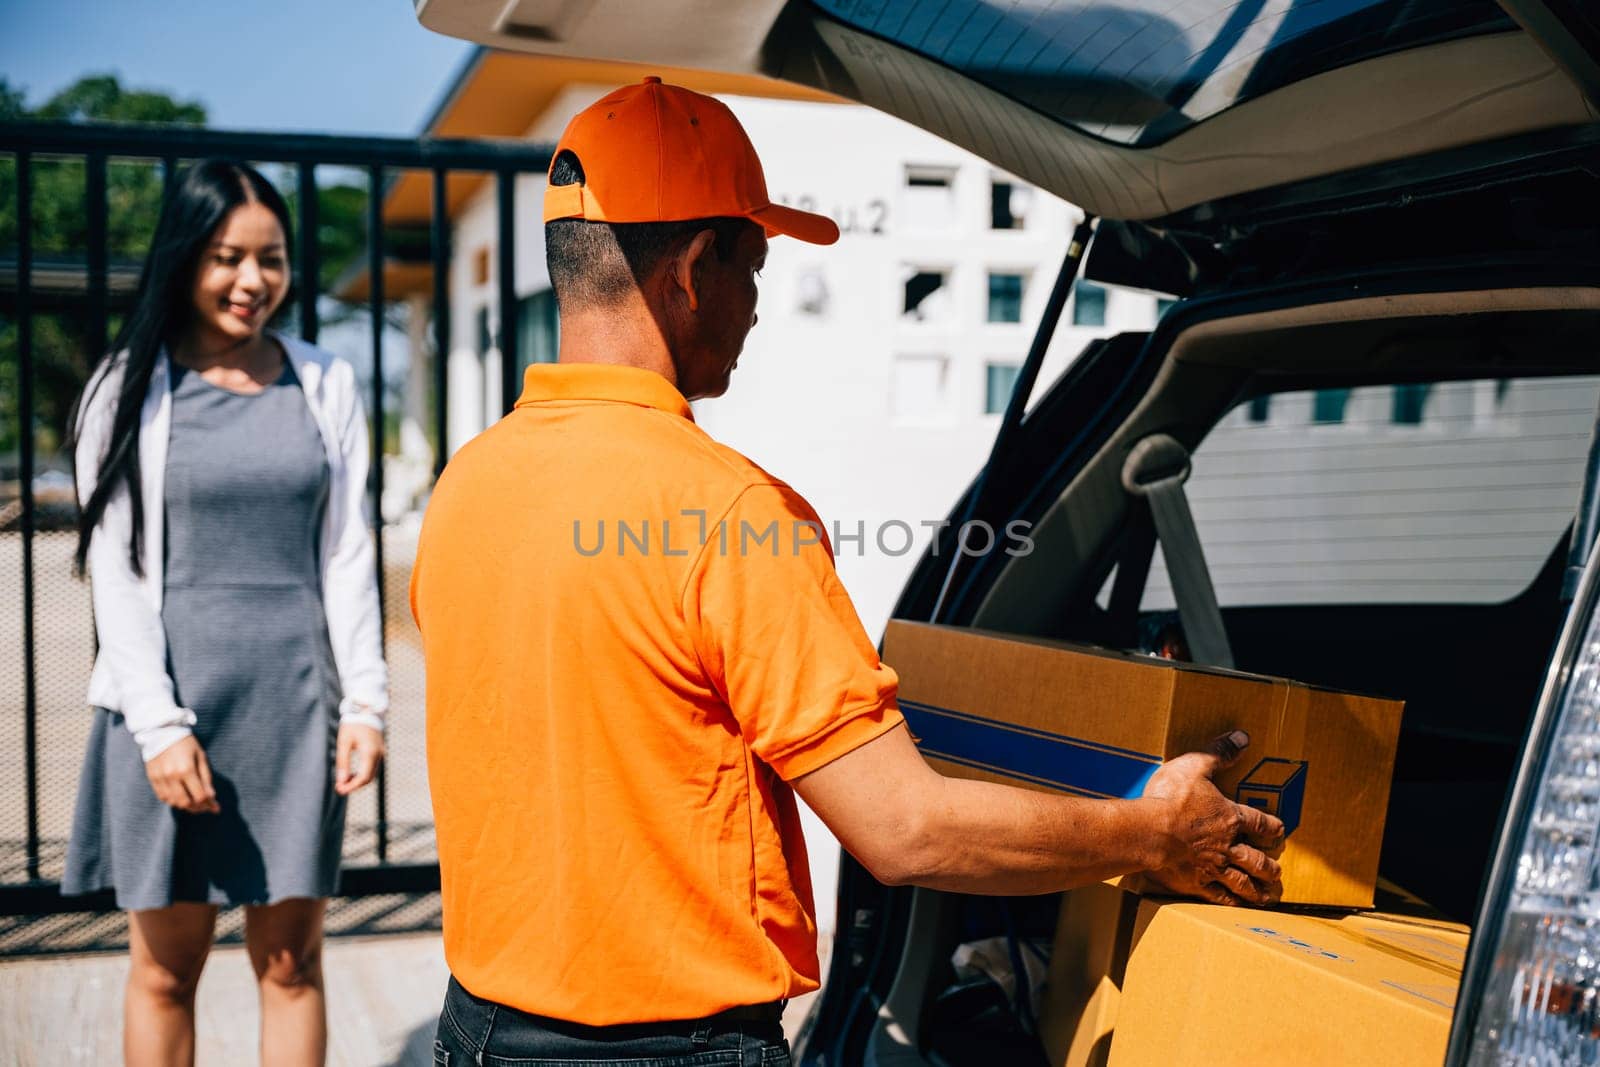 Emphasizing efficient home delivery service a courier in uniform hands a cardboard parcel to a smiling woman customer at her front house door highlighting modern delivery logistics.